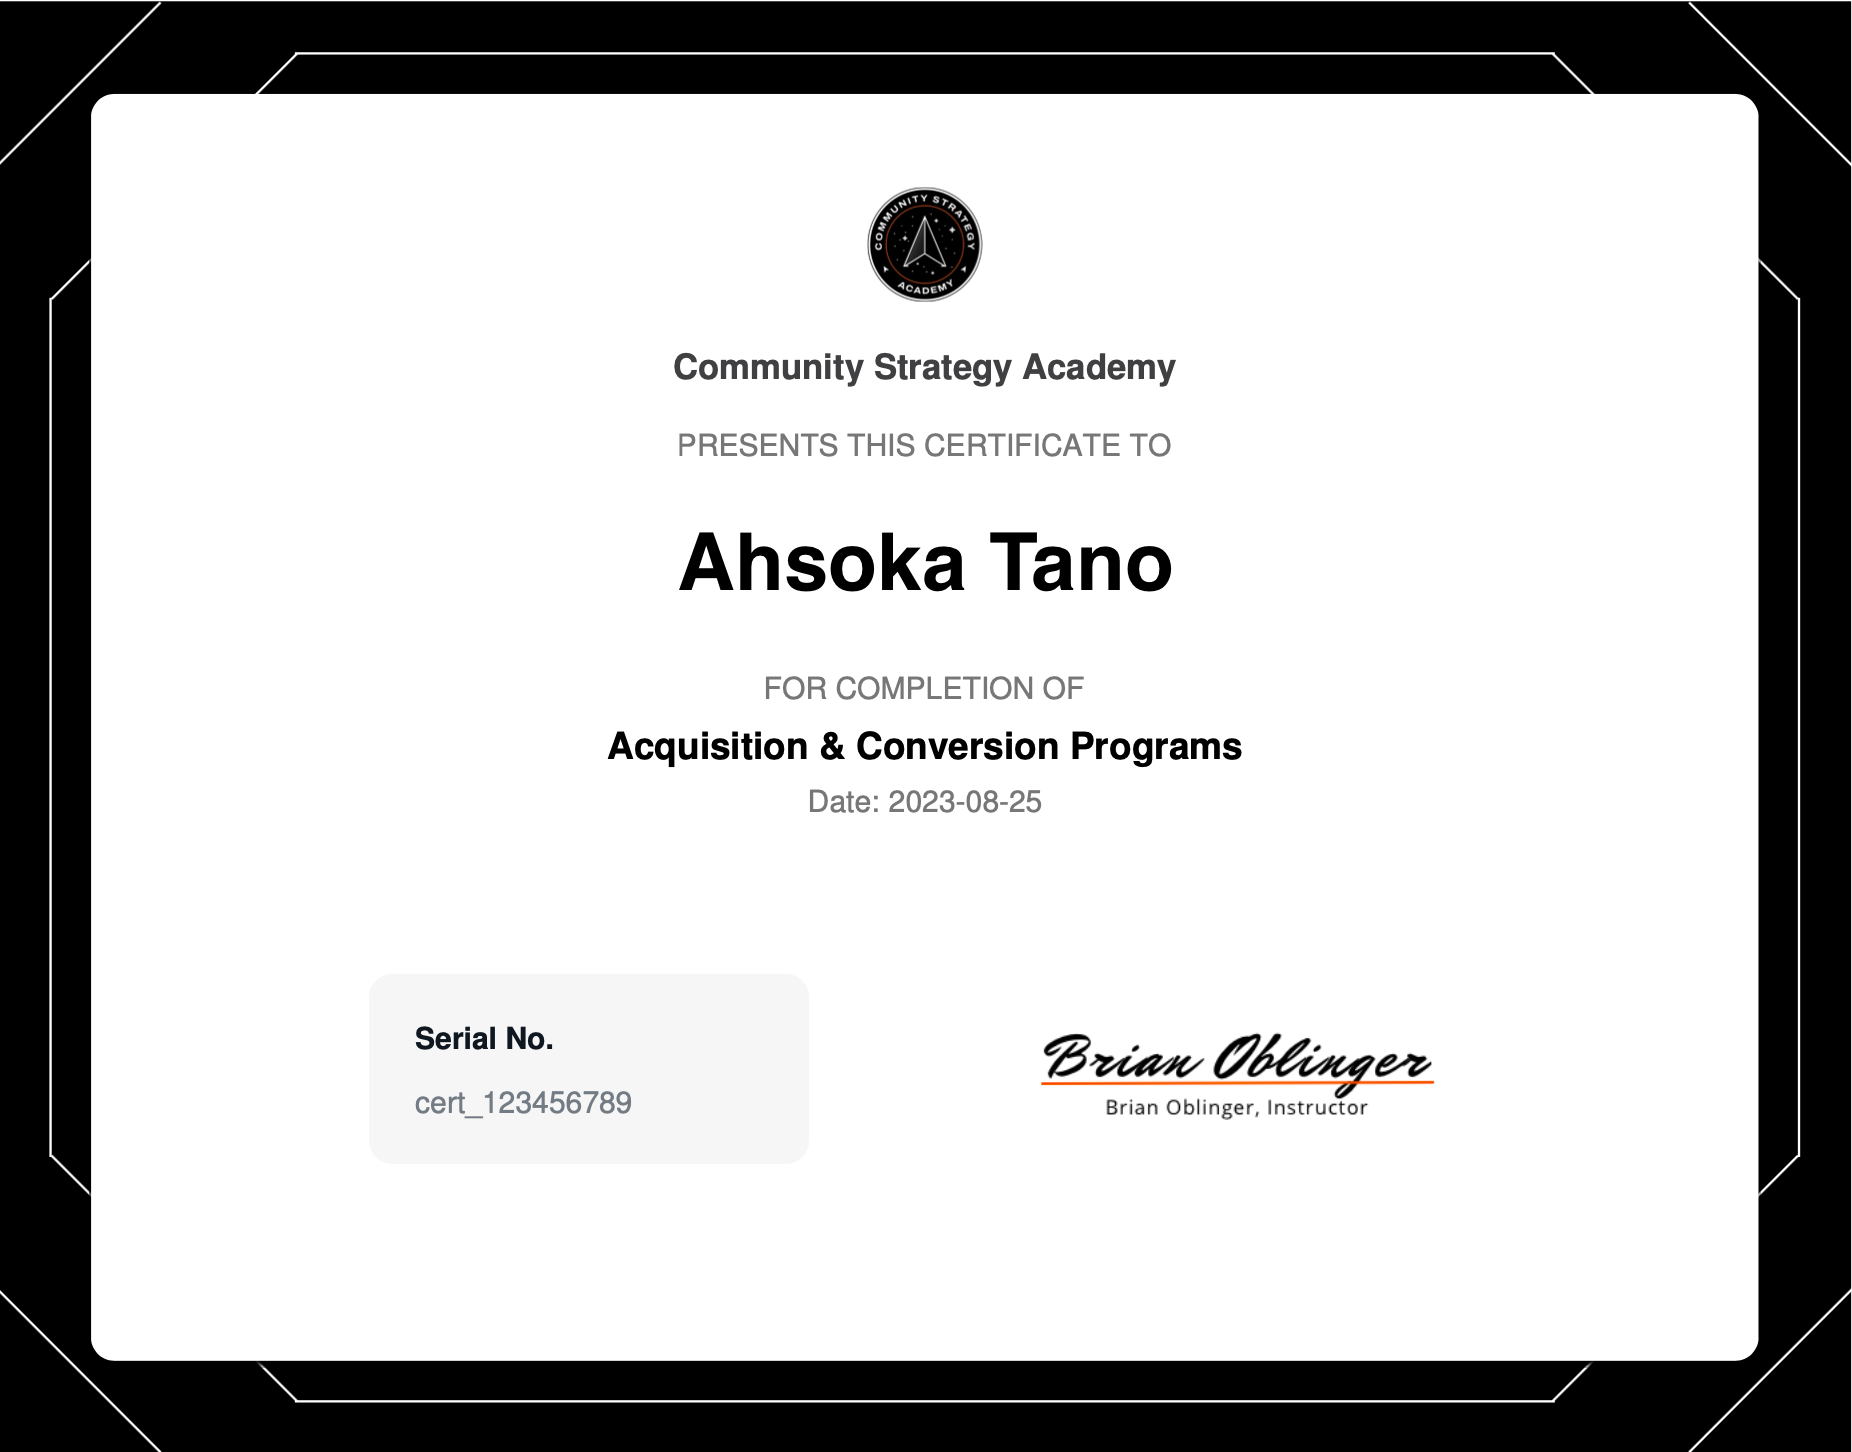 Community Strategy Academy Certificate Of Completion